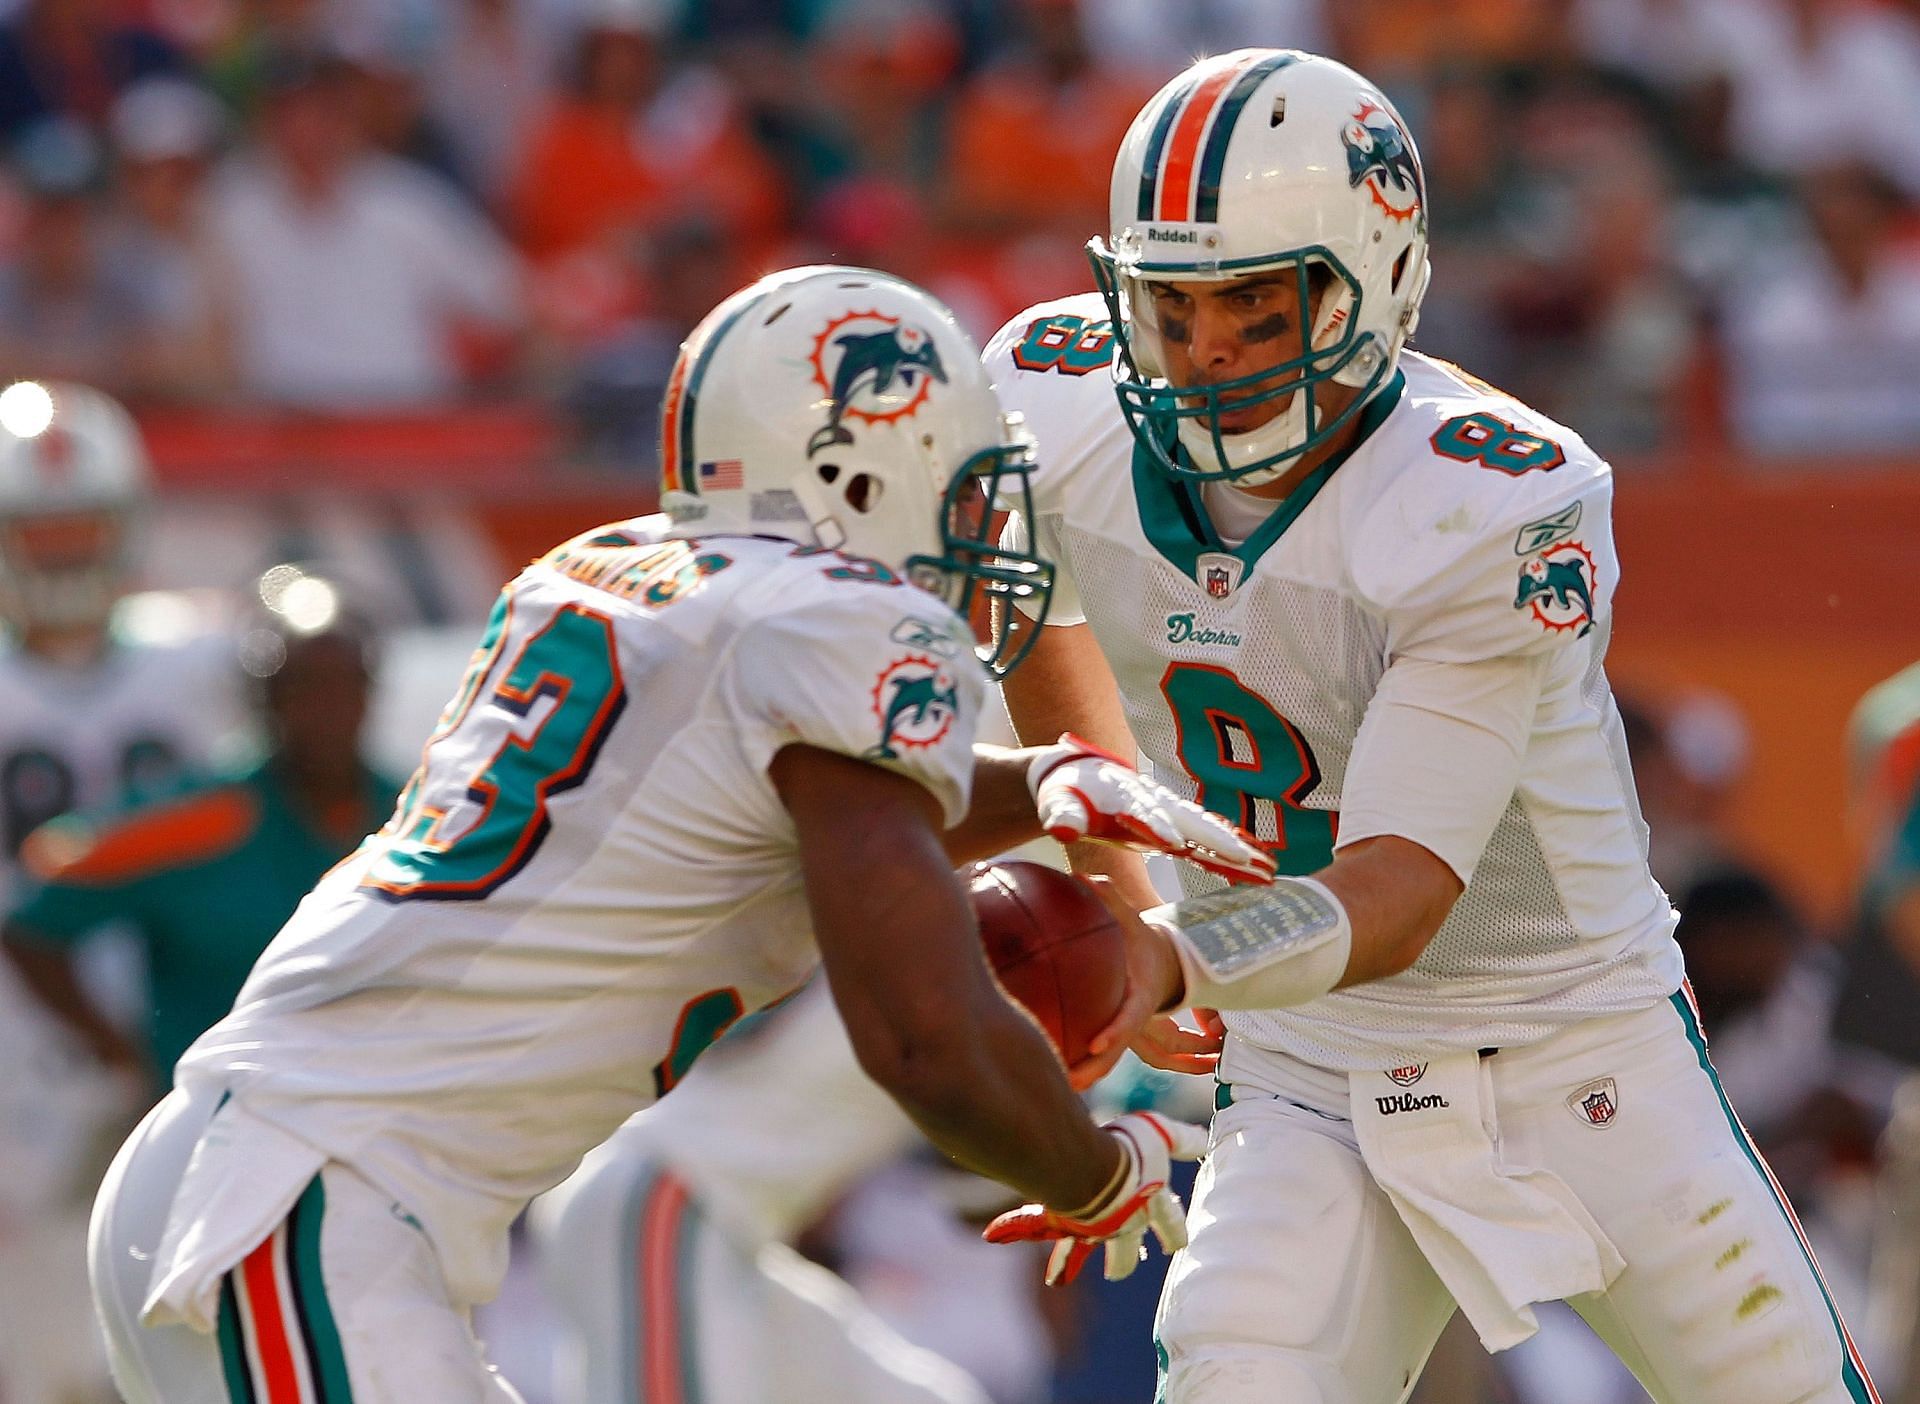 Matt Moore (8) hands the ball off to Steve Slaton during the drive in question (Photo: Getty)